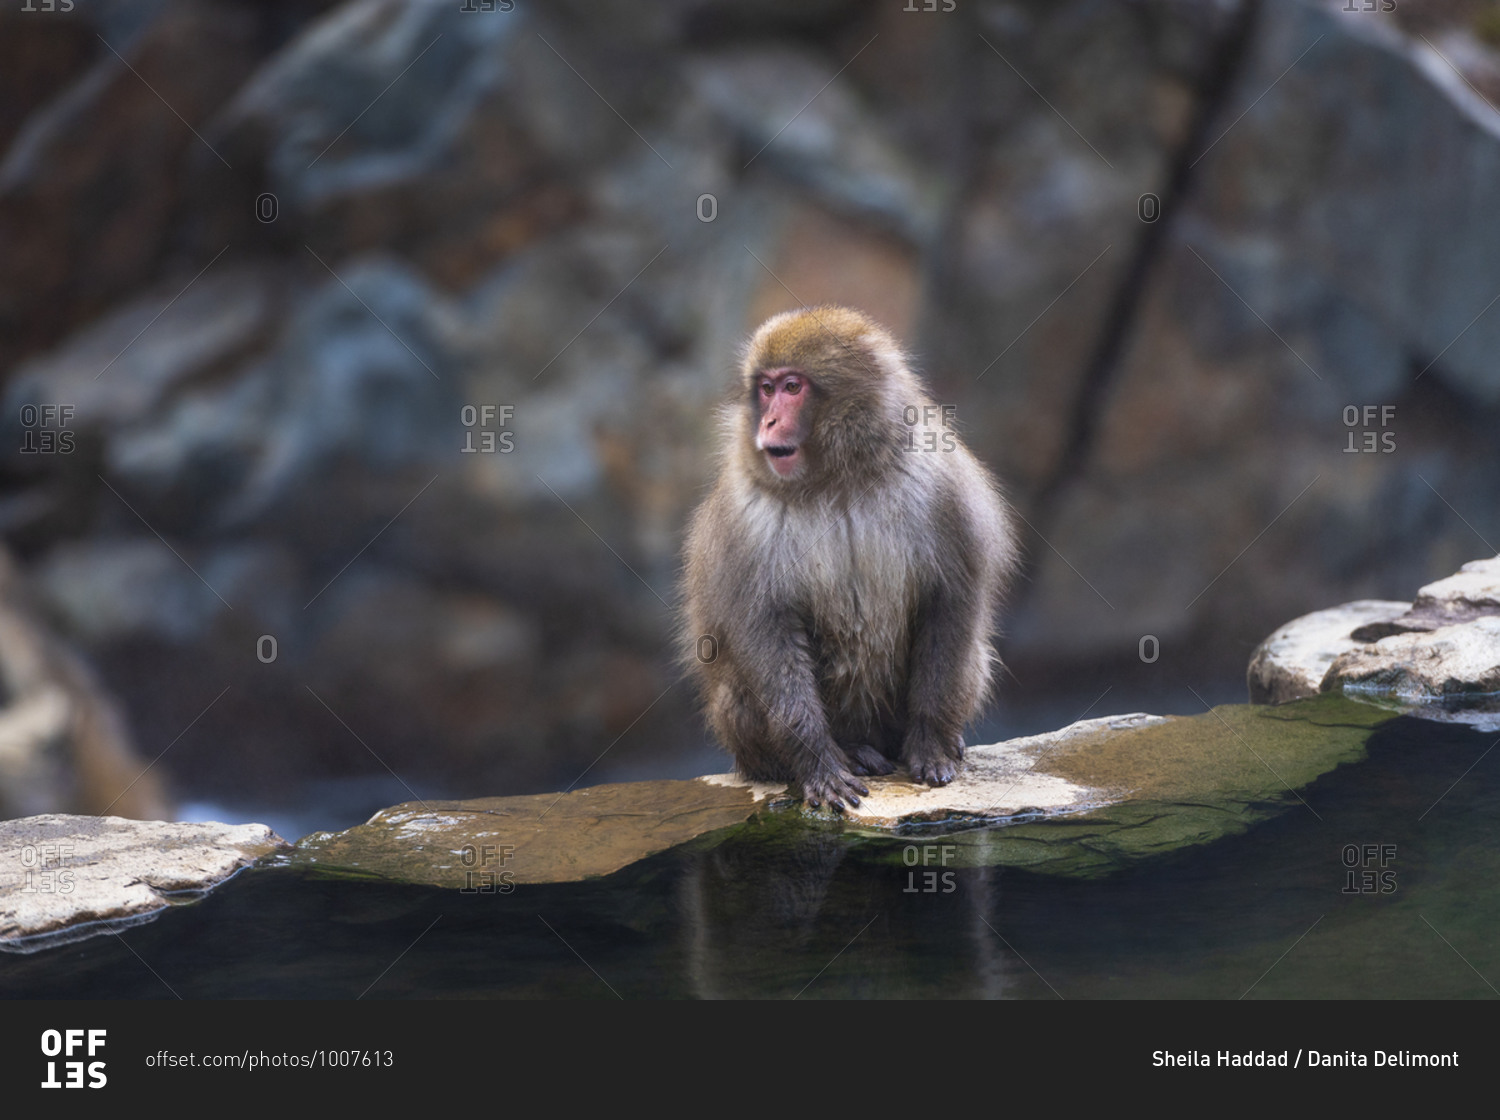 A juvenile macaque, snow monkey, sitting on a ledge alongside the hot springs making sounds, Japan